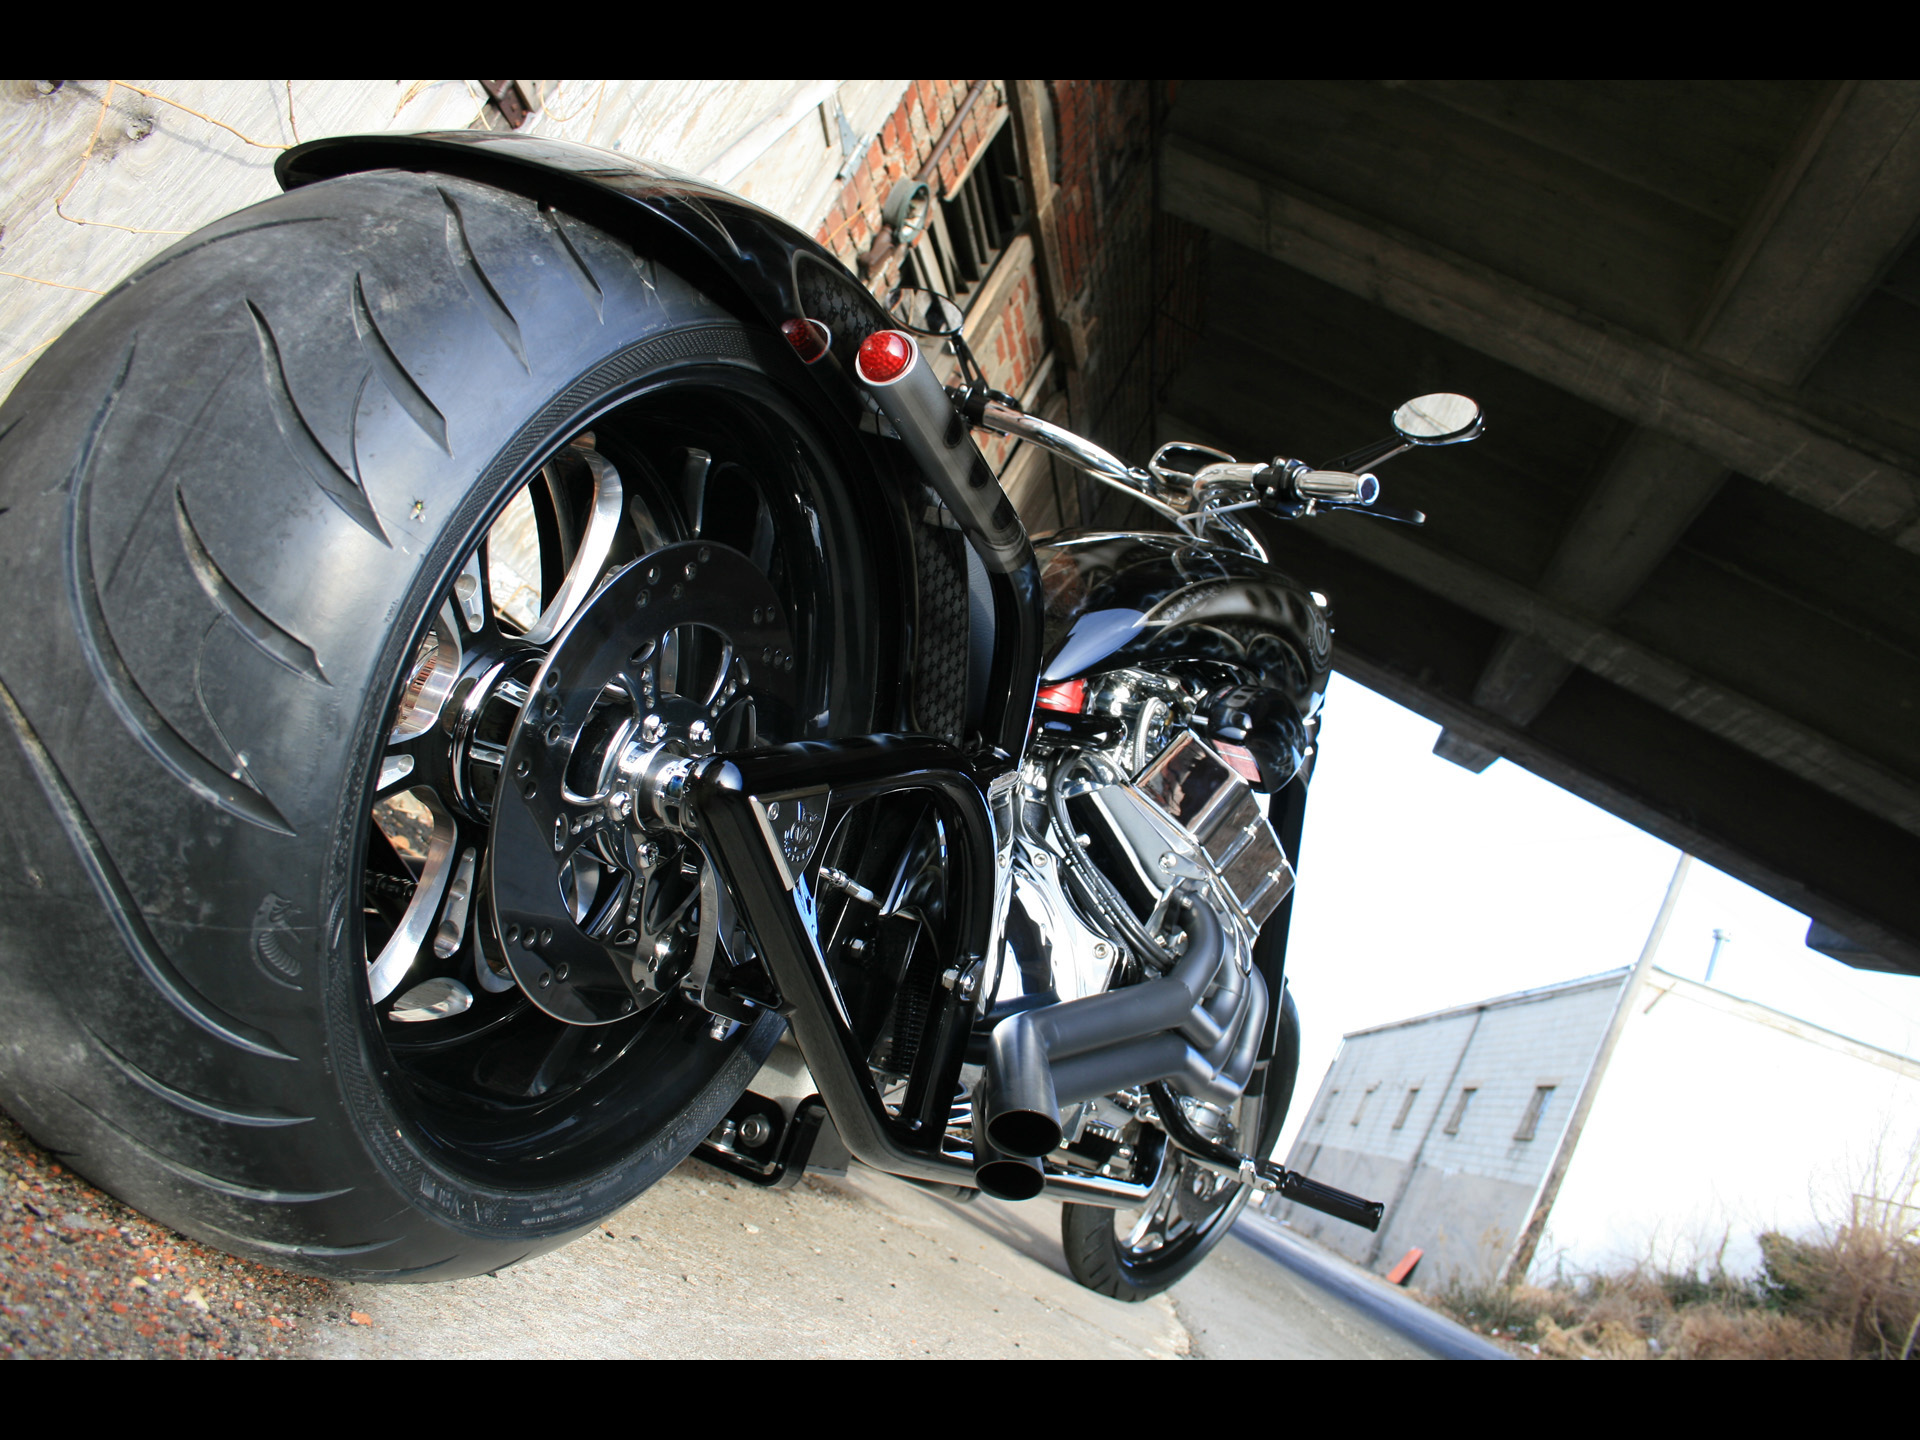 2011, V8 choppers, C series, Section, V 8, Chopper, Choppers, Engine, Engines, Muscle, Hot, Rod, Rods, Wheel, Wheels Wallpaper